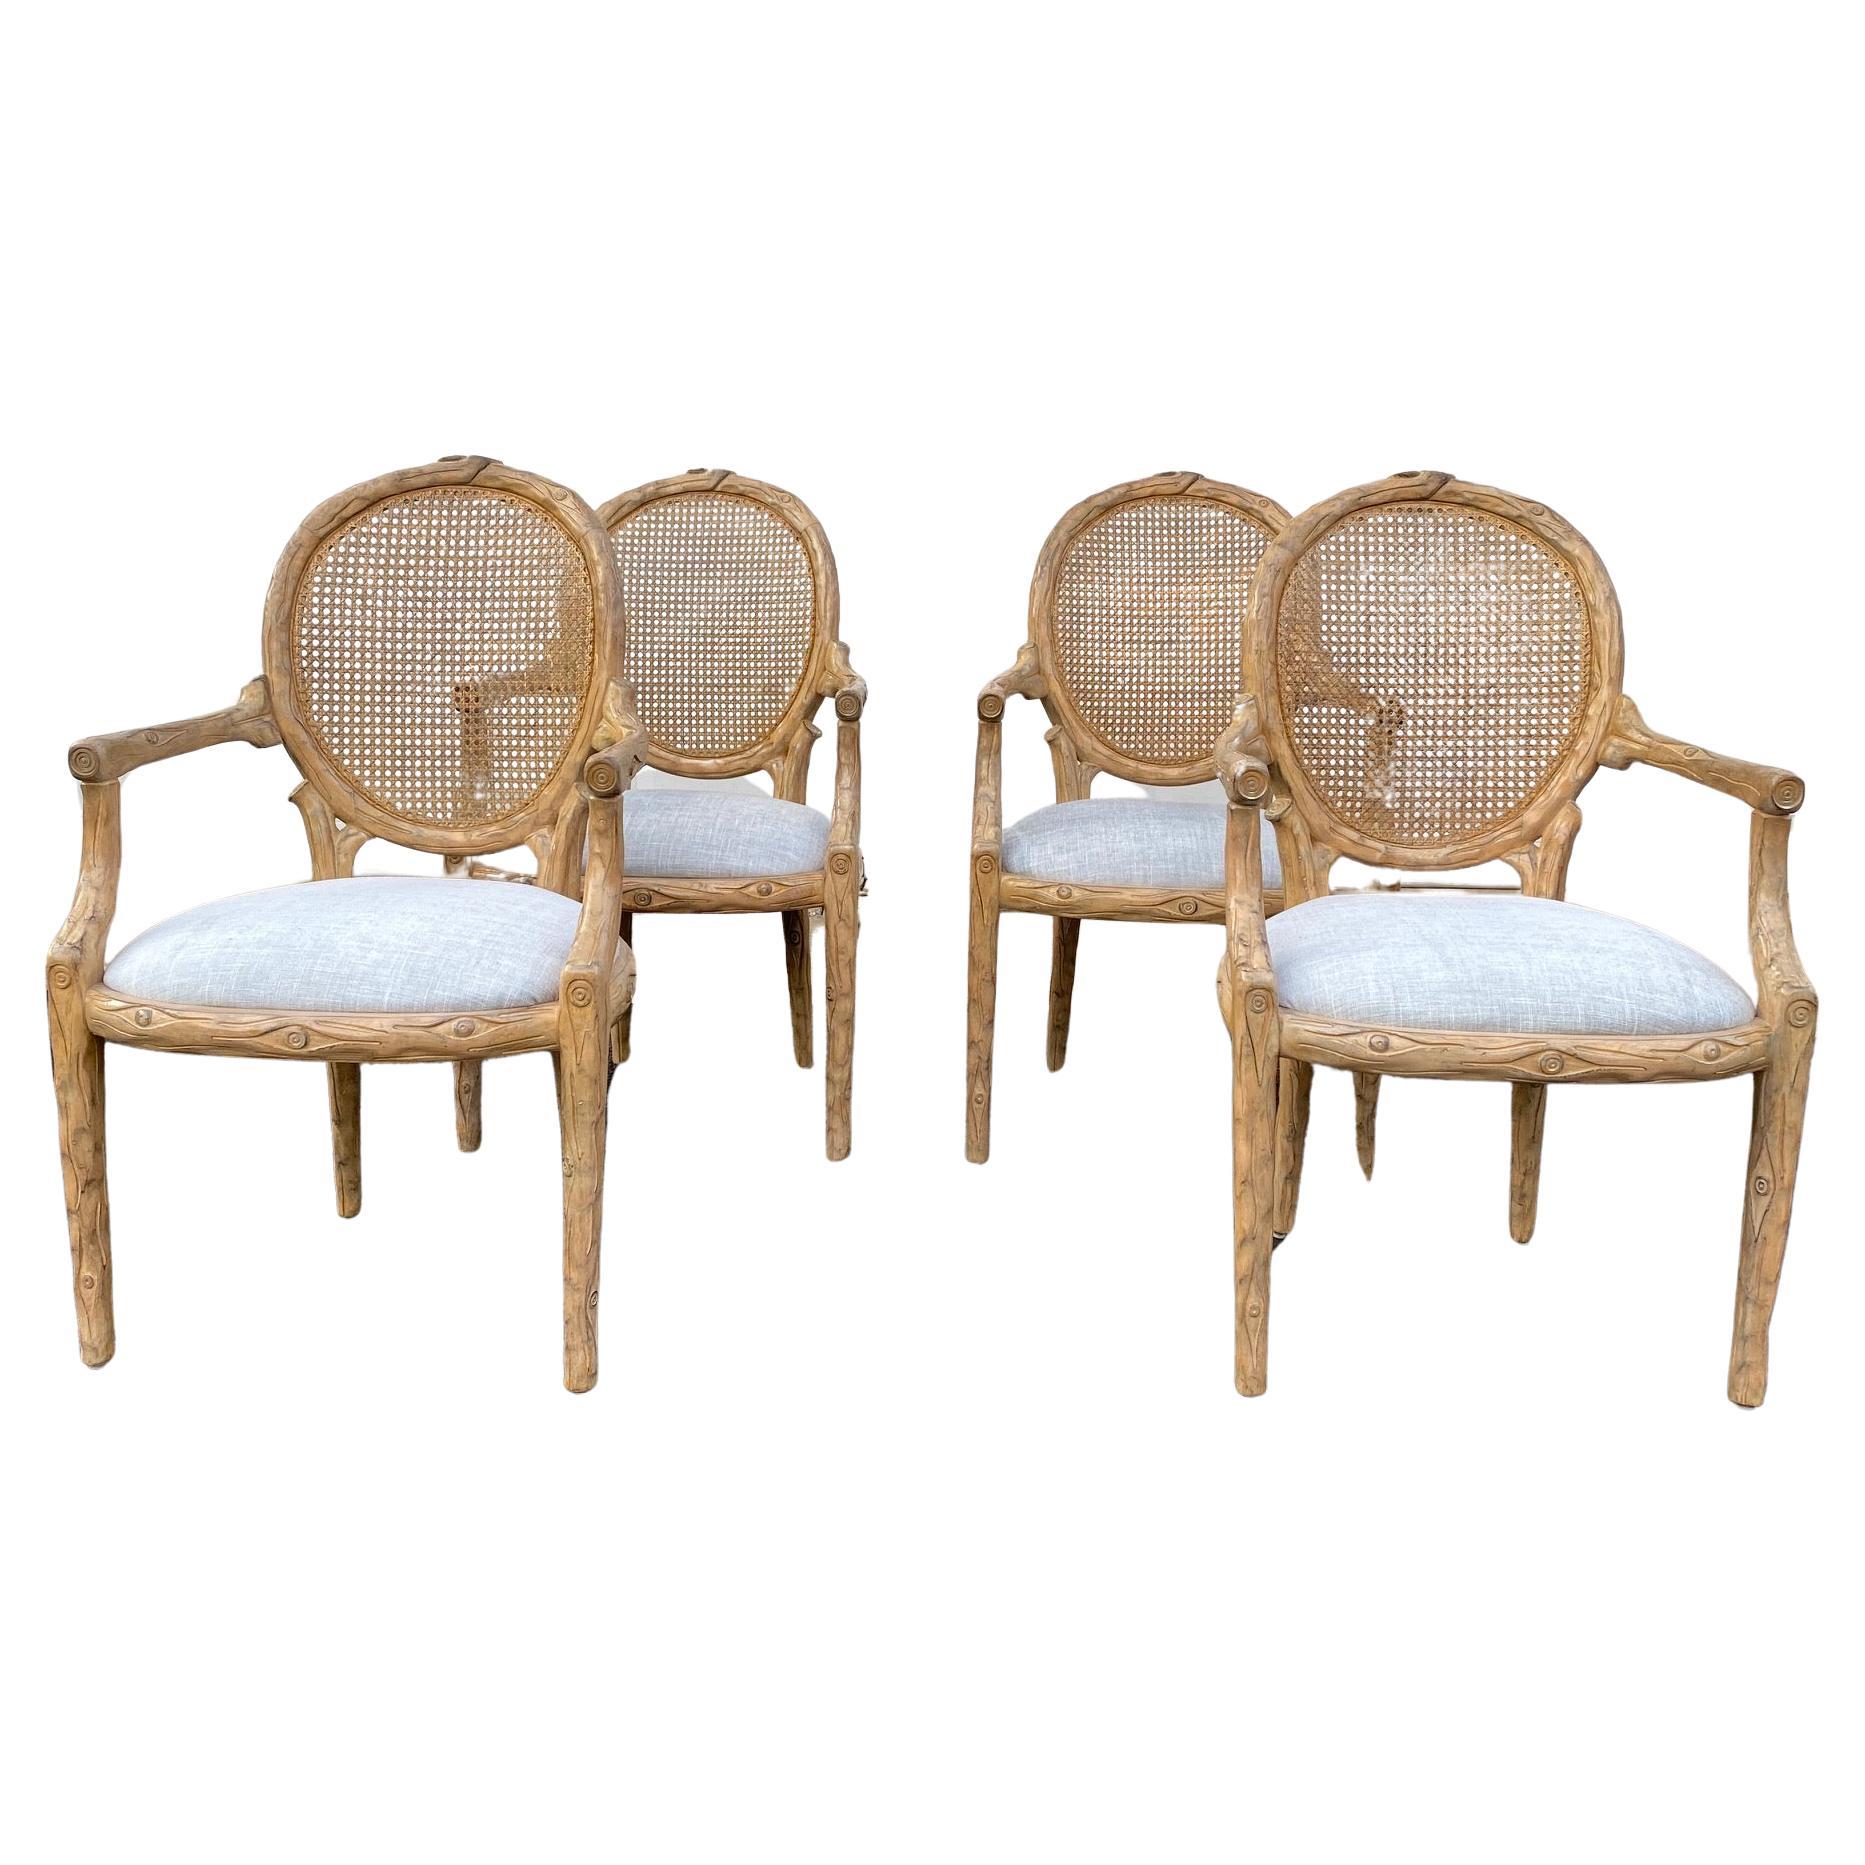 Set of 4 Wooden Faux Bois Dining Armchairs